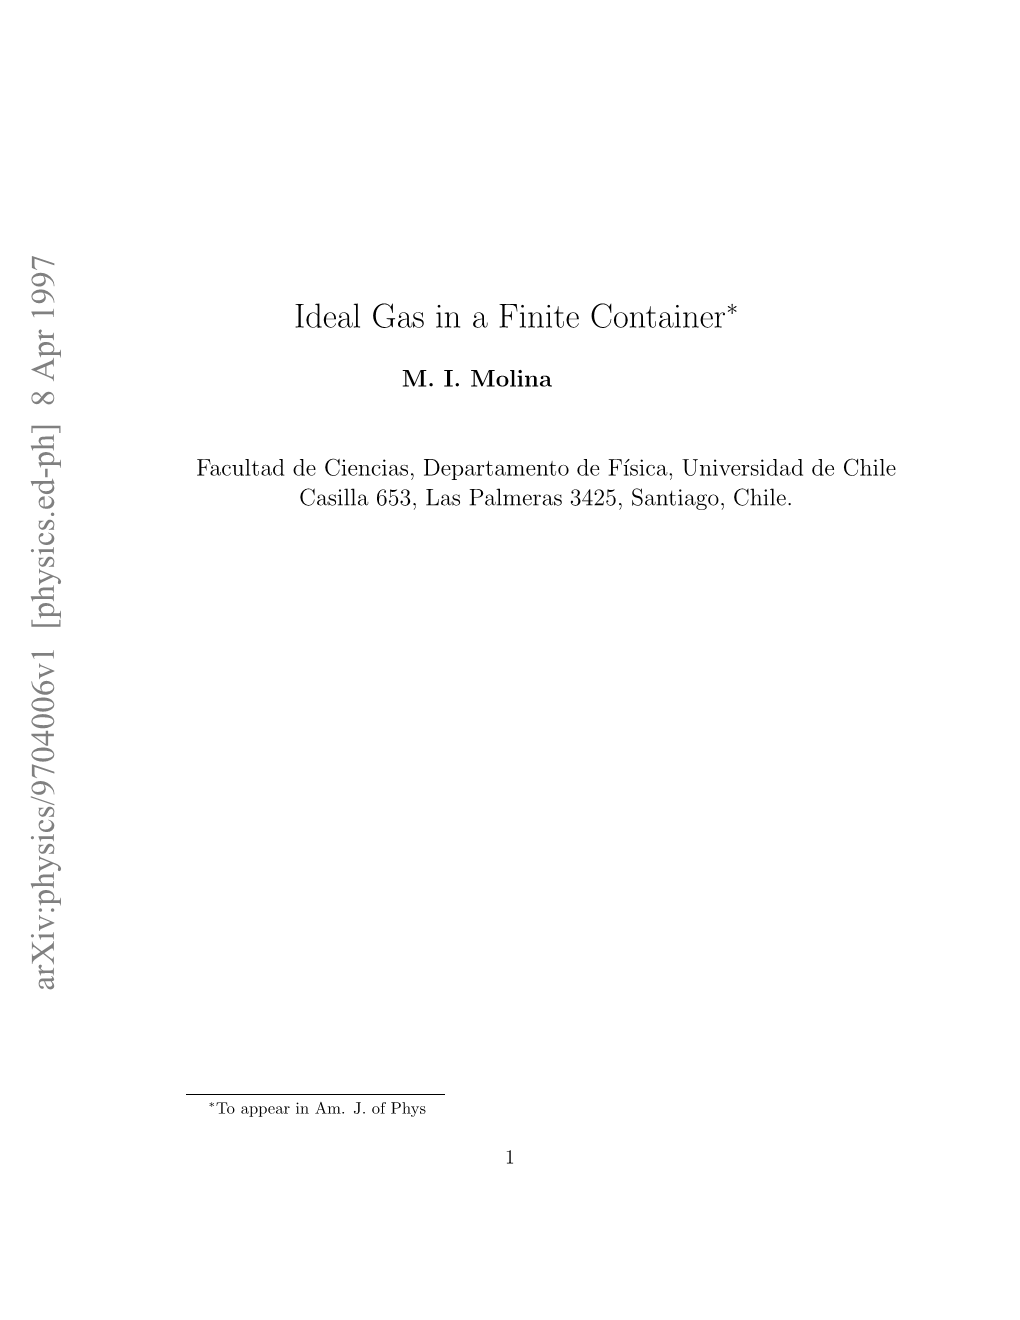 Ideal Gas in a Finite Container